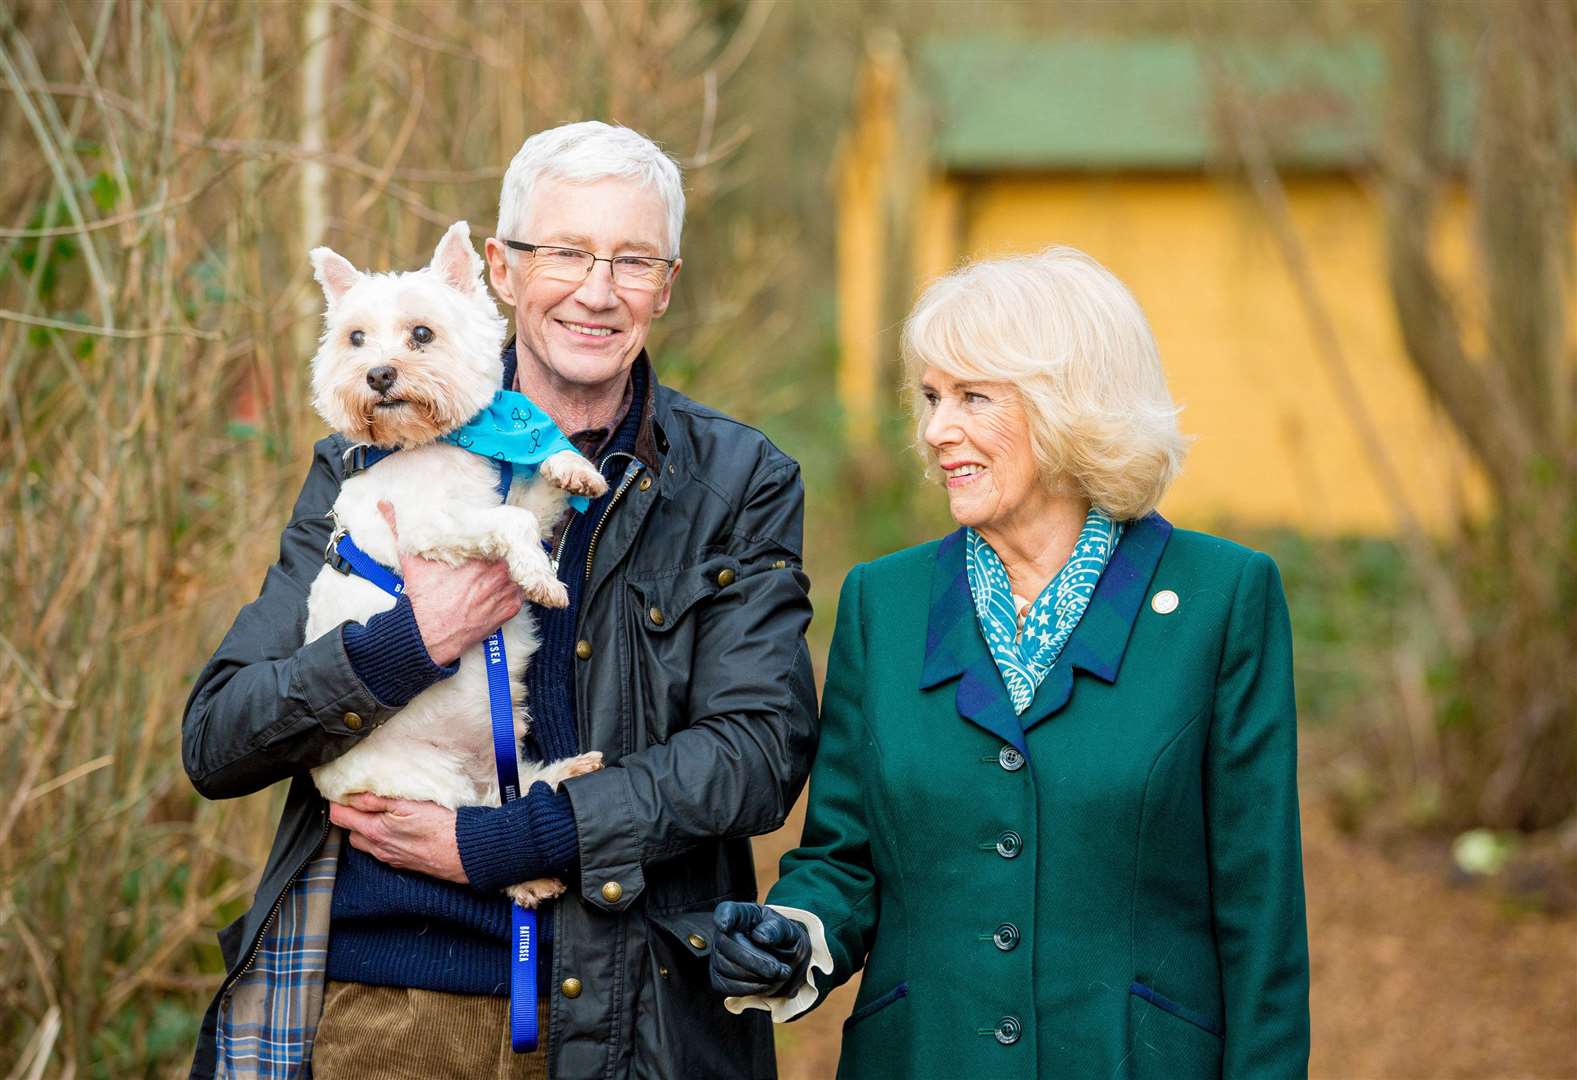 Paul O'Grady with Her Majesty the Queen Consort